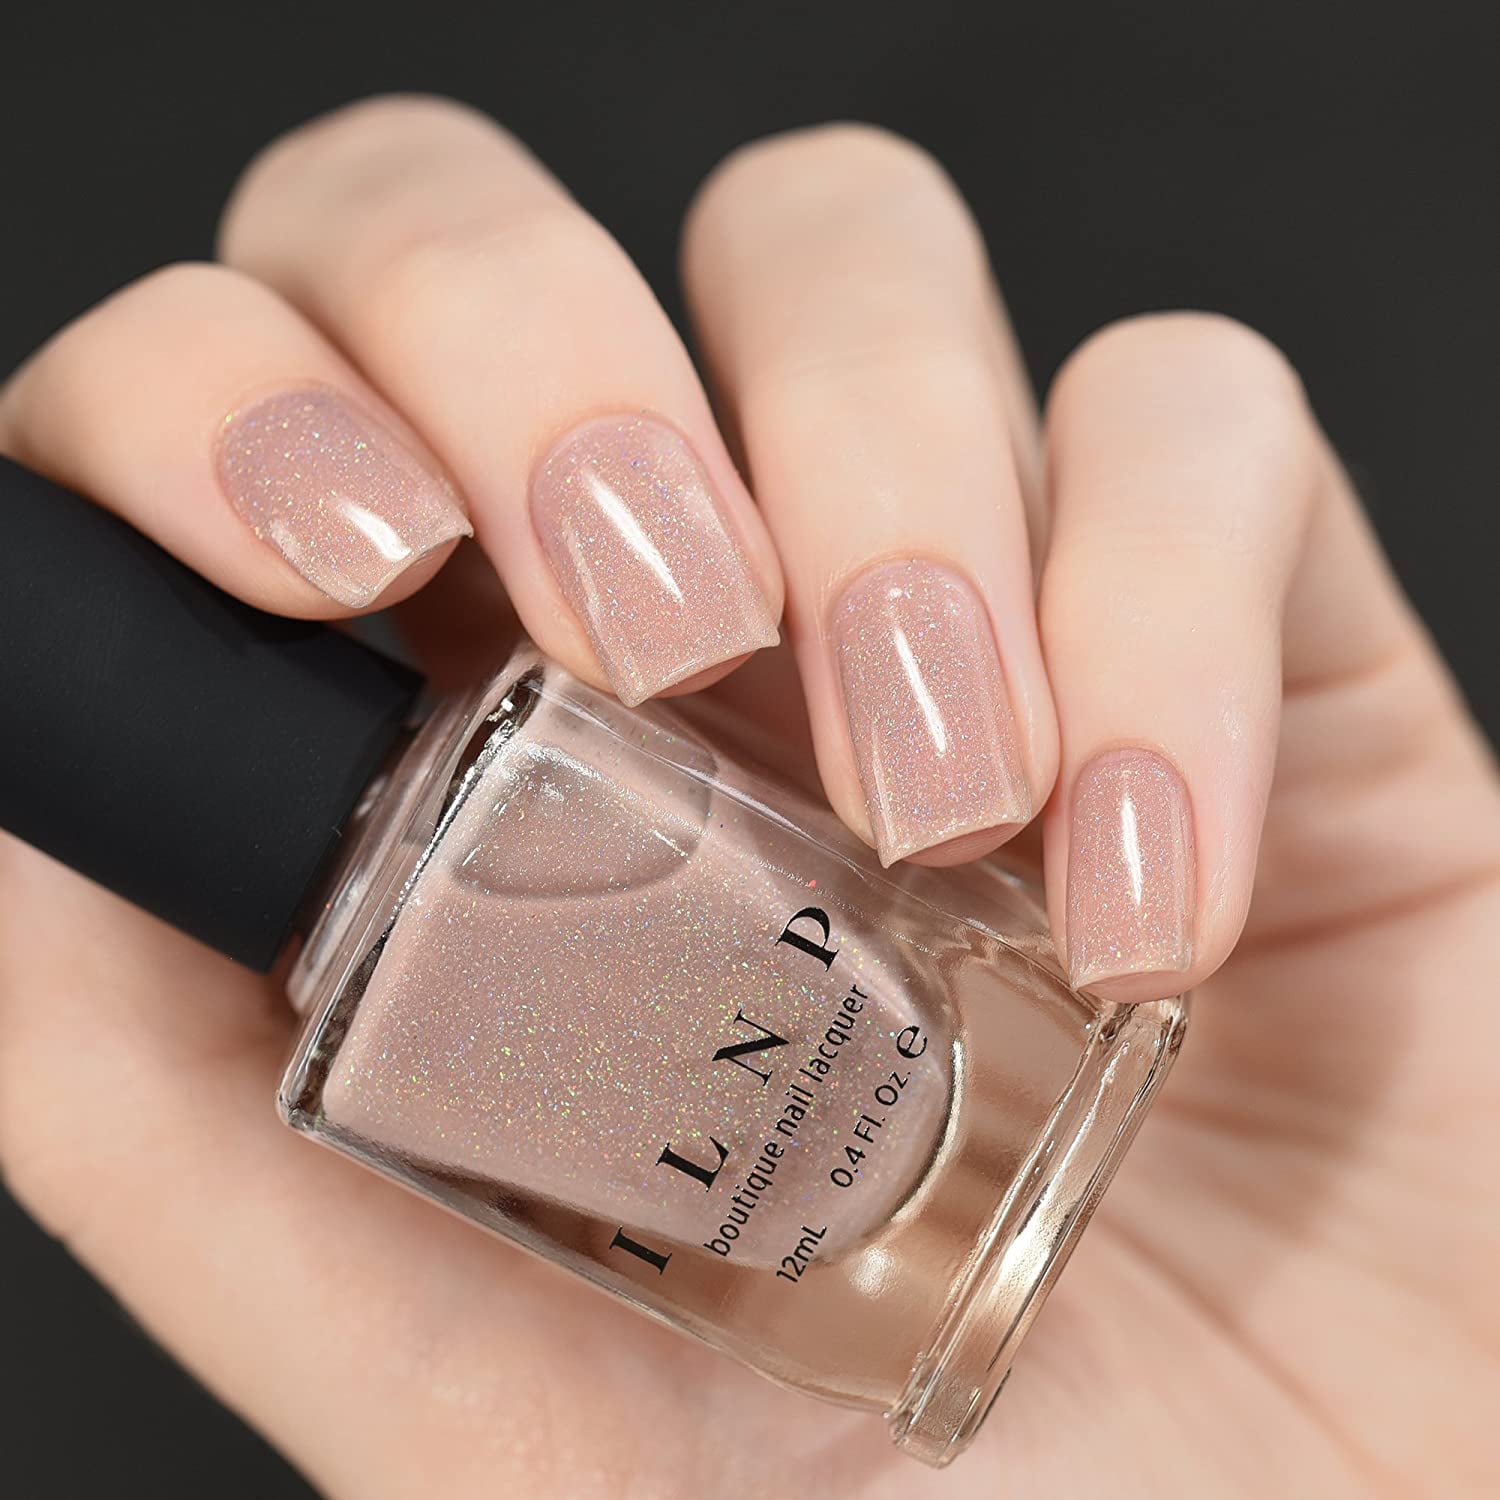 The Best Pink & Neutral Nail Polishes for Spring